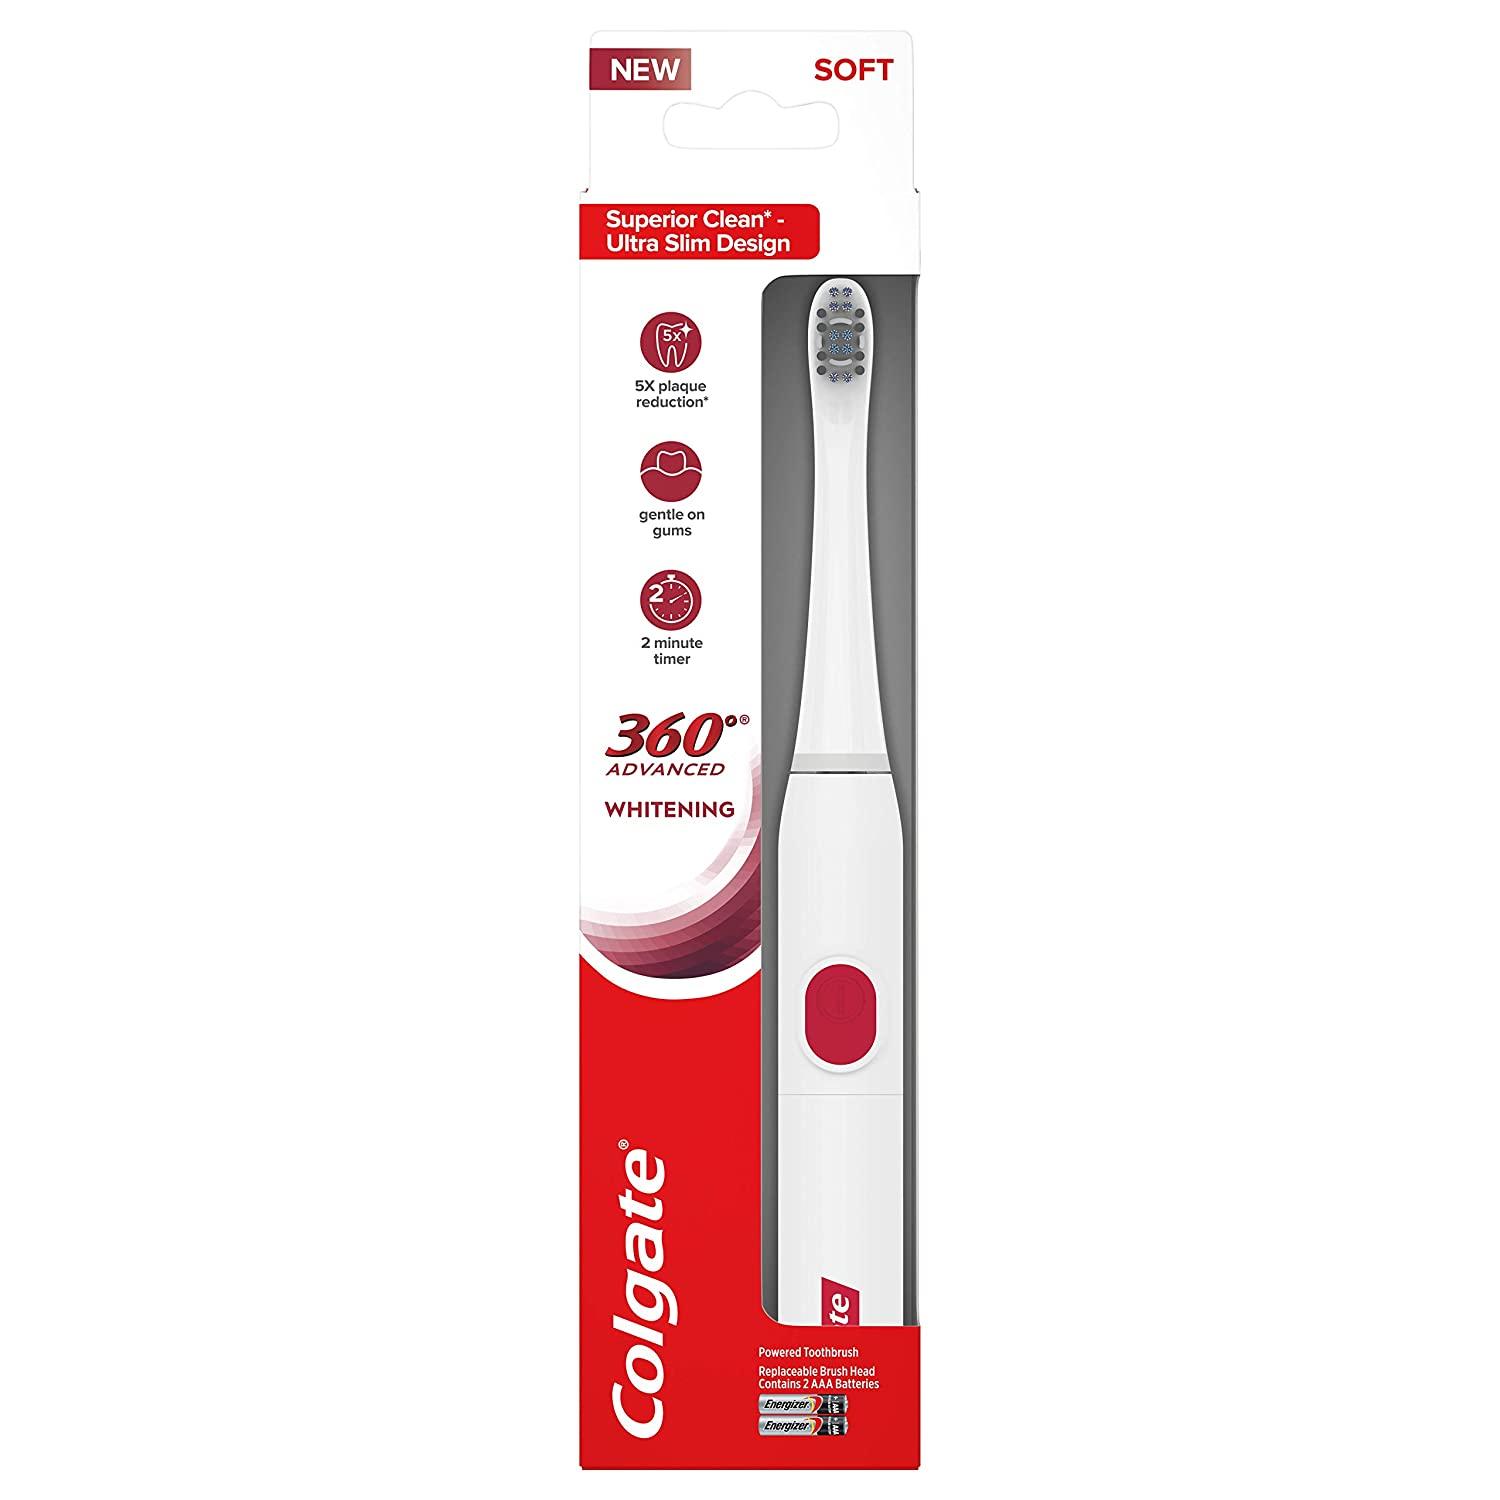 Colgate 360 Advance Whitening Electric Toothbrush 4 Pack for $13.99